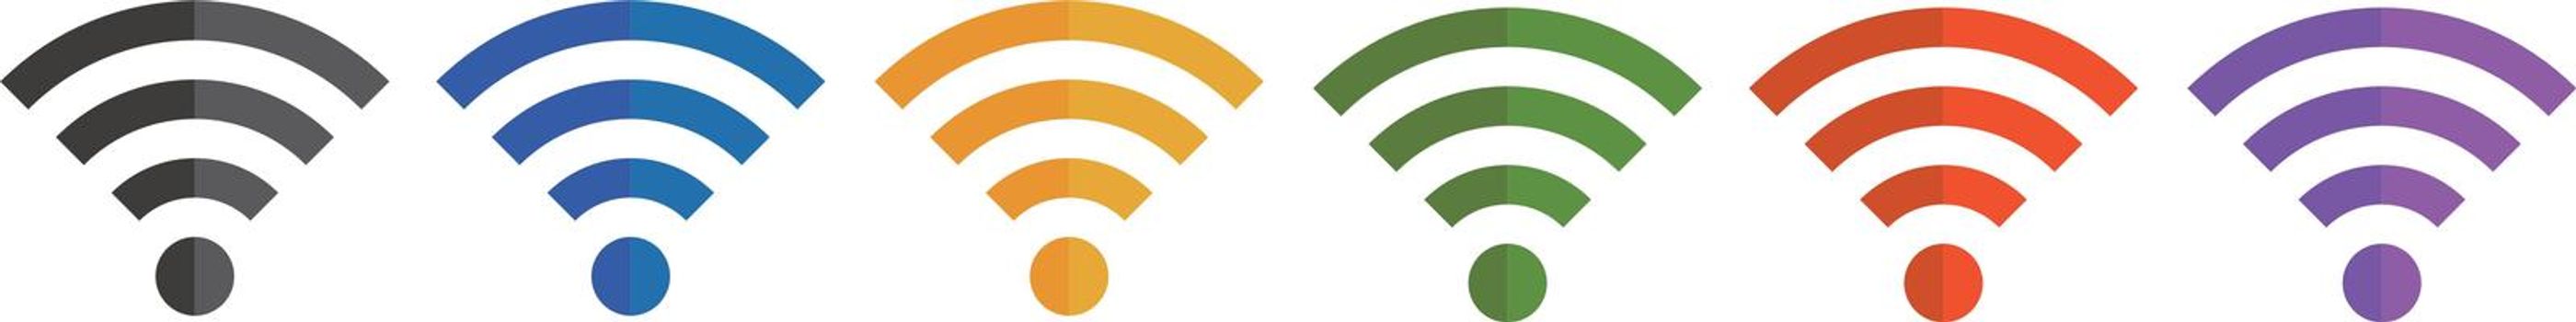 Wi-Fi icons in a variety of colors. Six different vector images.